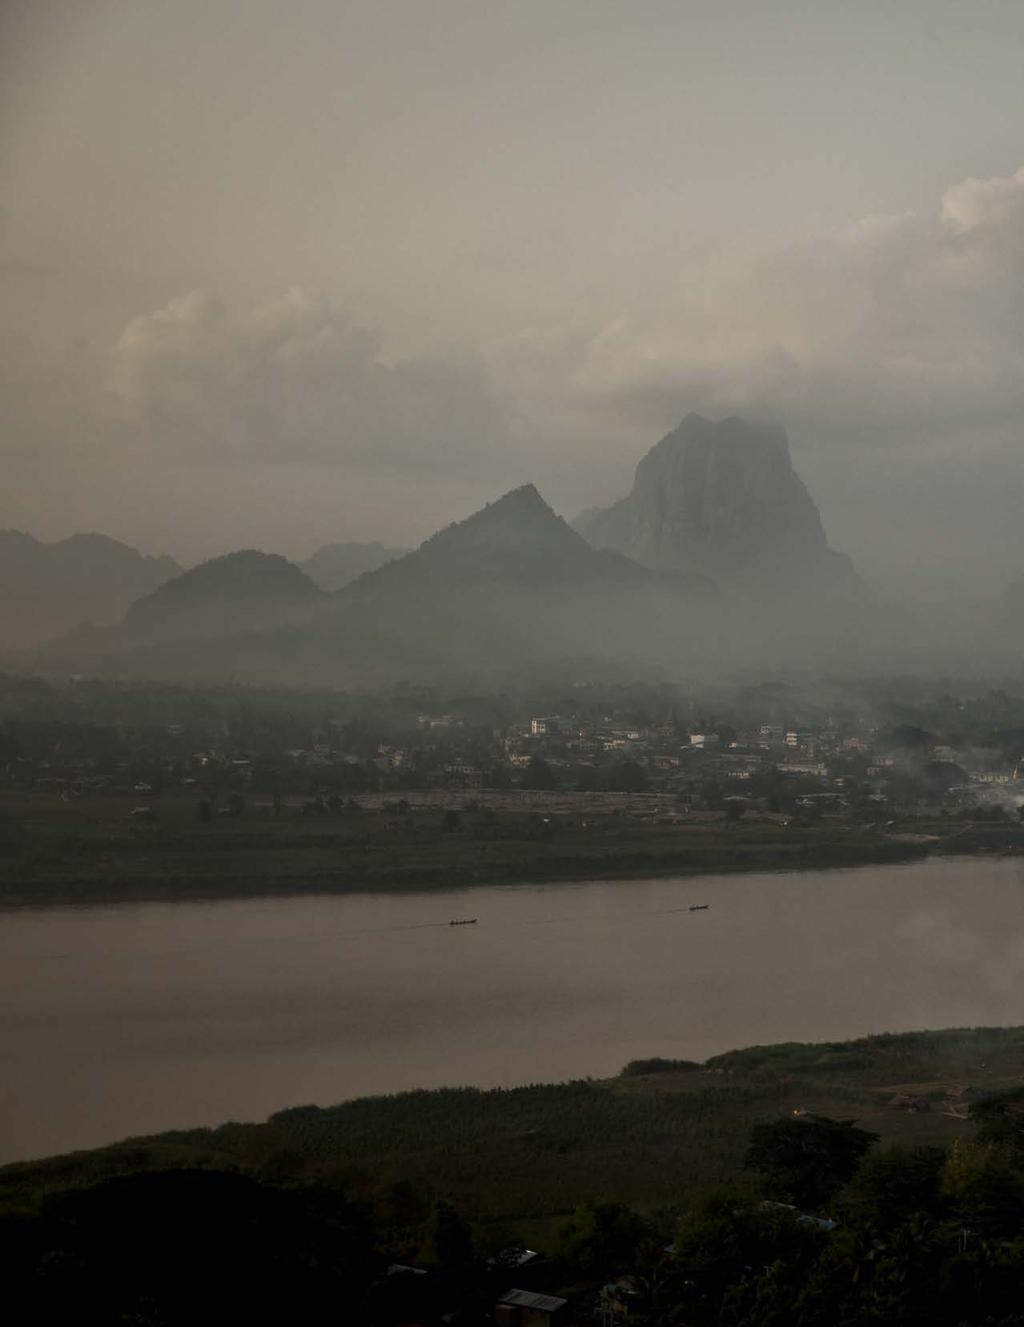 View of Hpa-an, capital of Karen state, on the bank of the Salween River.